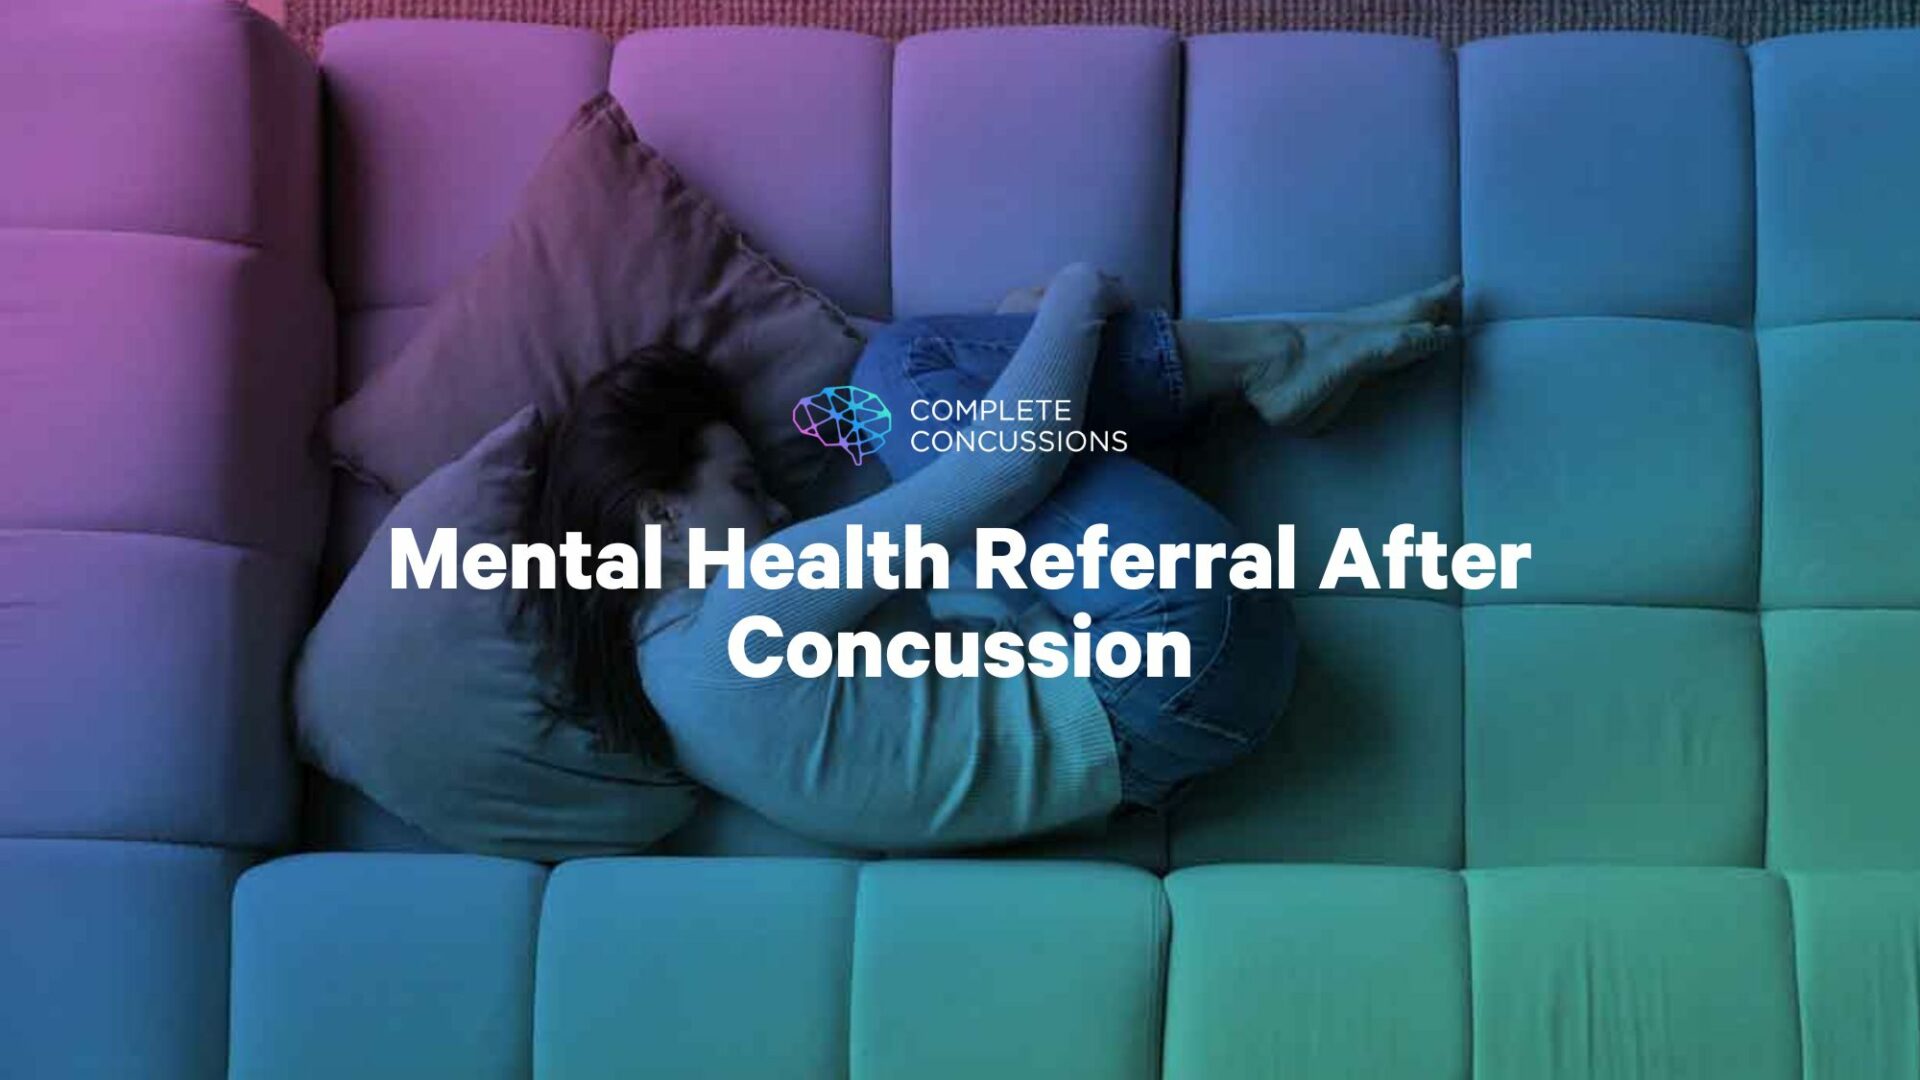 Mental Health Referral After Concussion